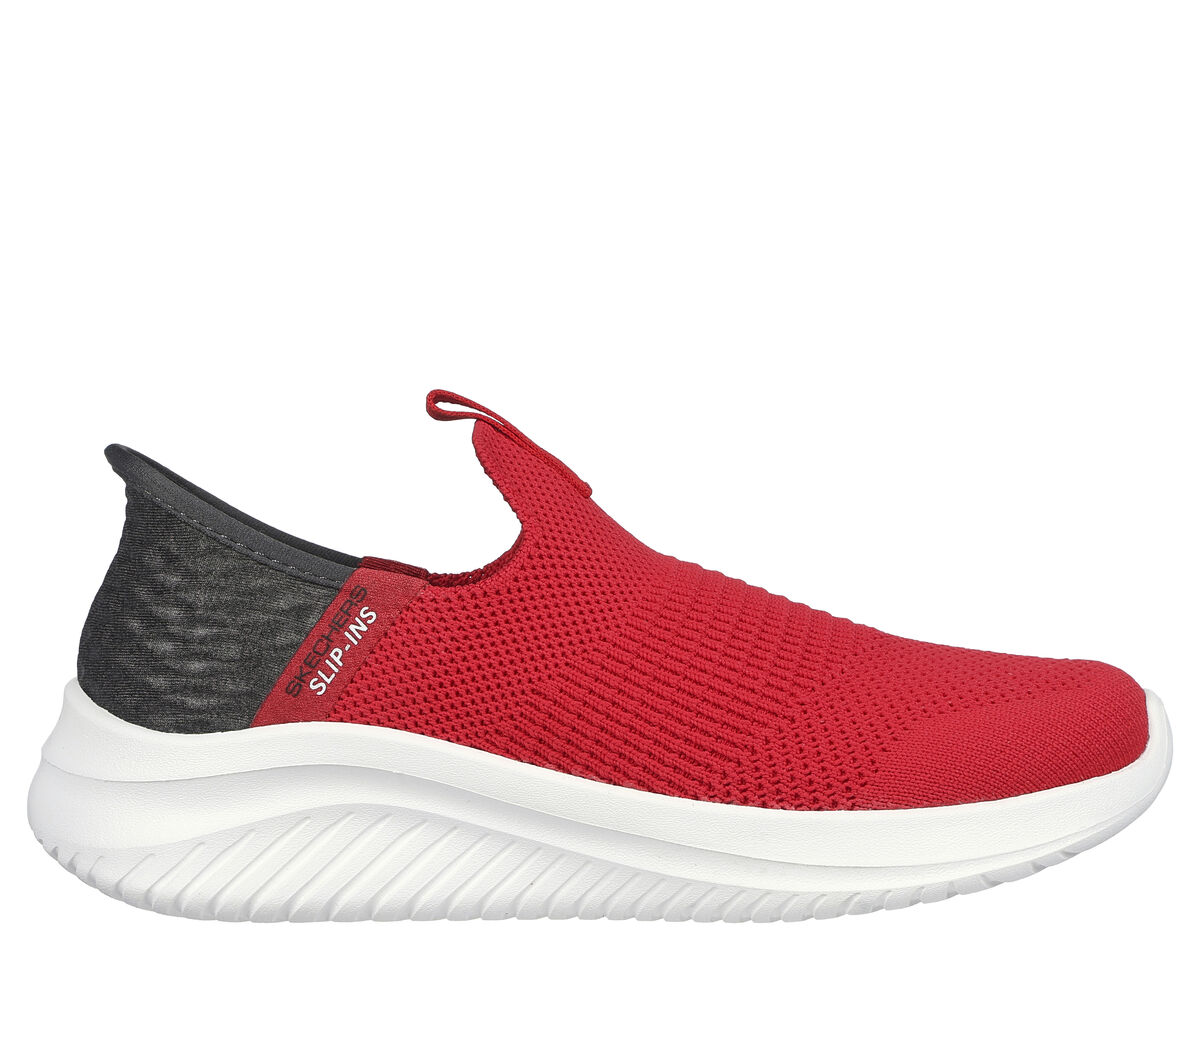 Skechers Sport Memory Foam Red Beyond Comfortable Size 13 New in Box Rare  Awesome Last One 